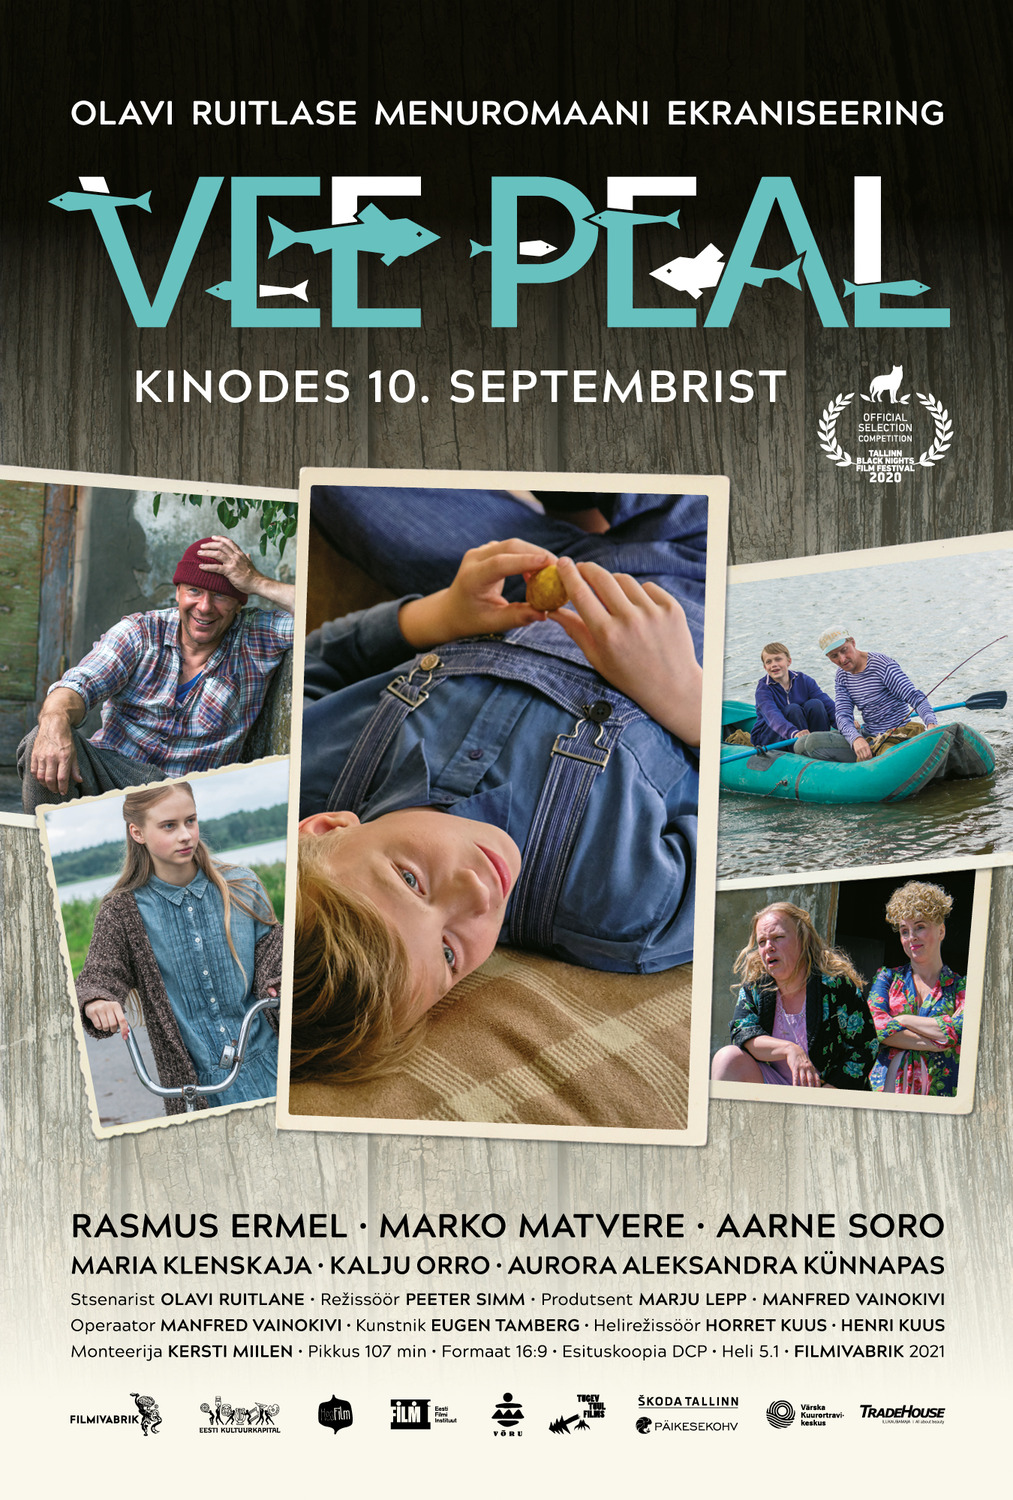 Extra Large Movie Poster Image for Vee peal 